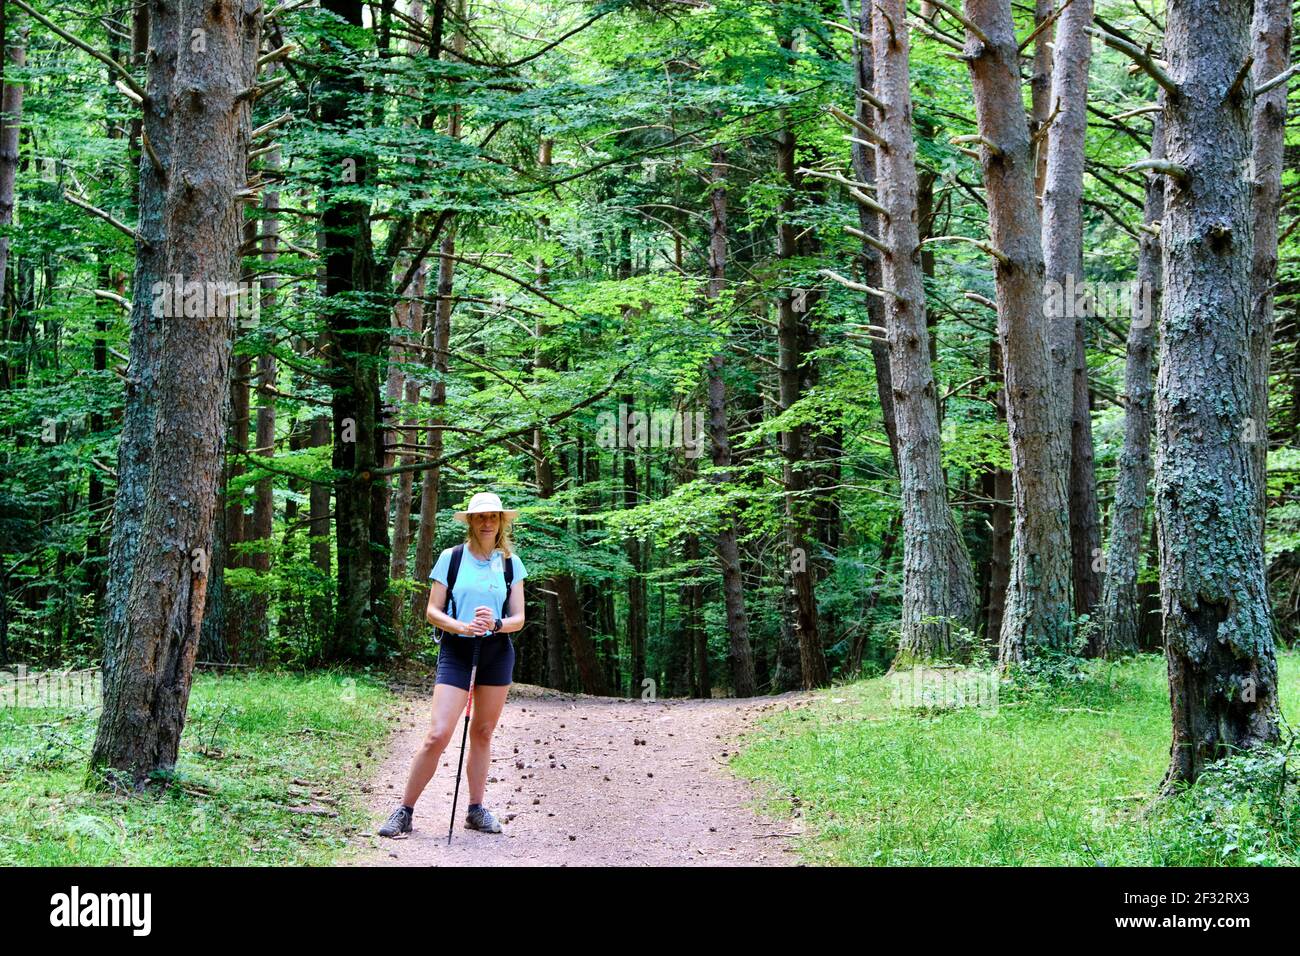 Hiker woman with a hat in a path in a forestry landscape. Stock Photo